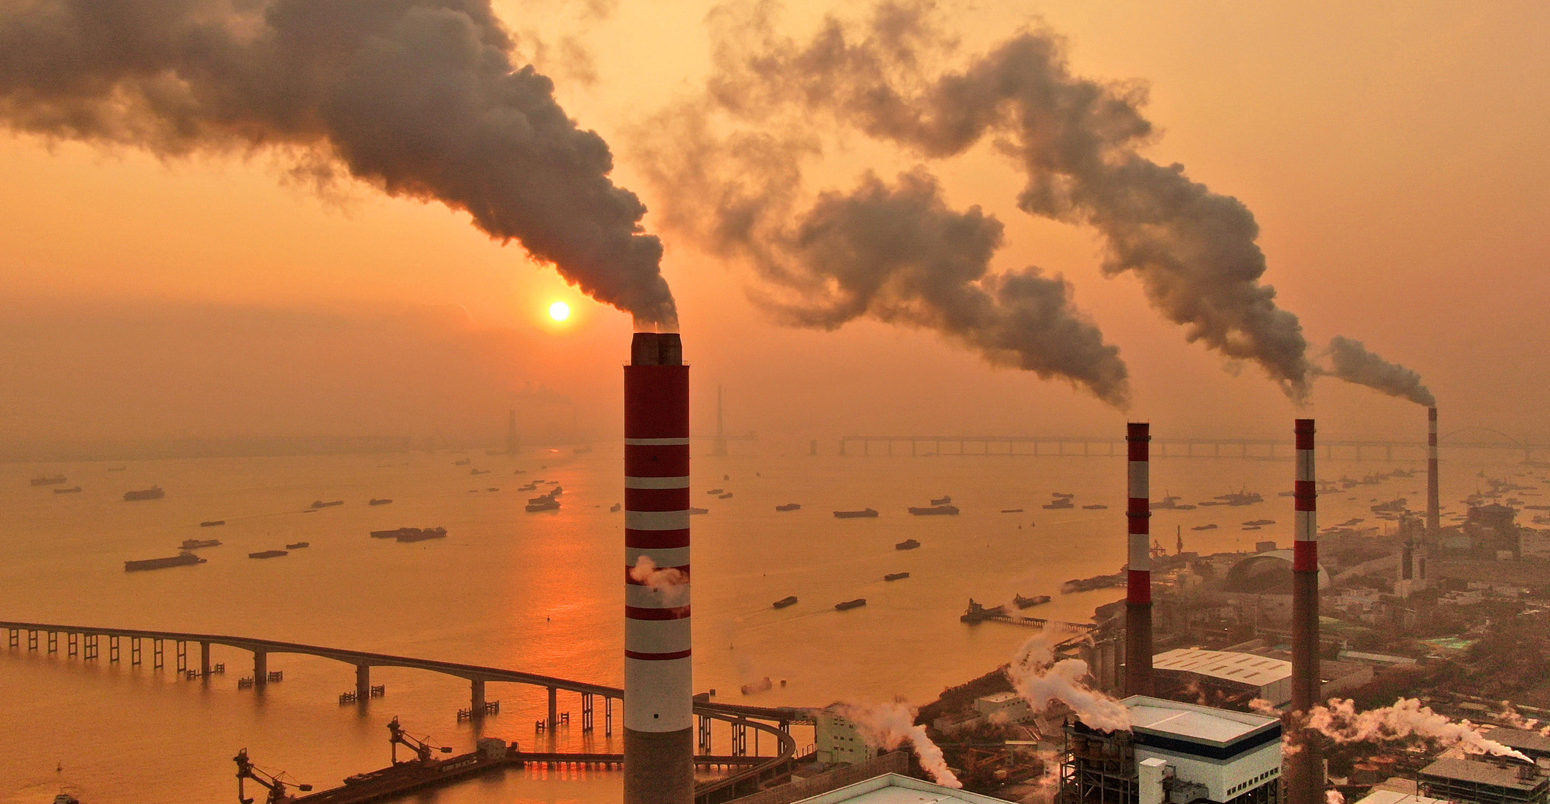 Smoke is discharged from chimneys at a coal-fired power plant in east China's Jiangsu province.